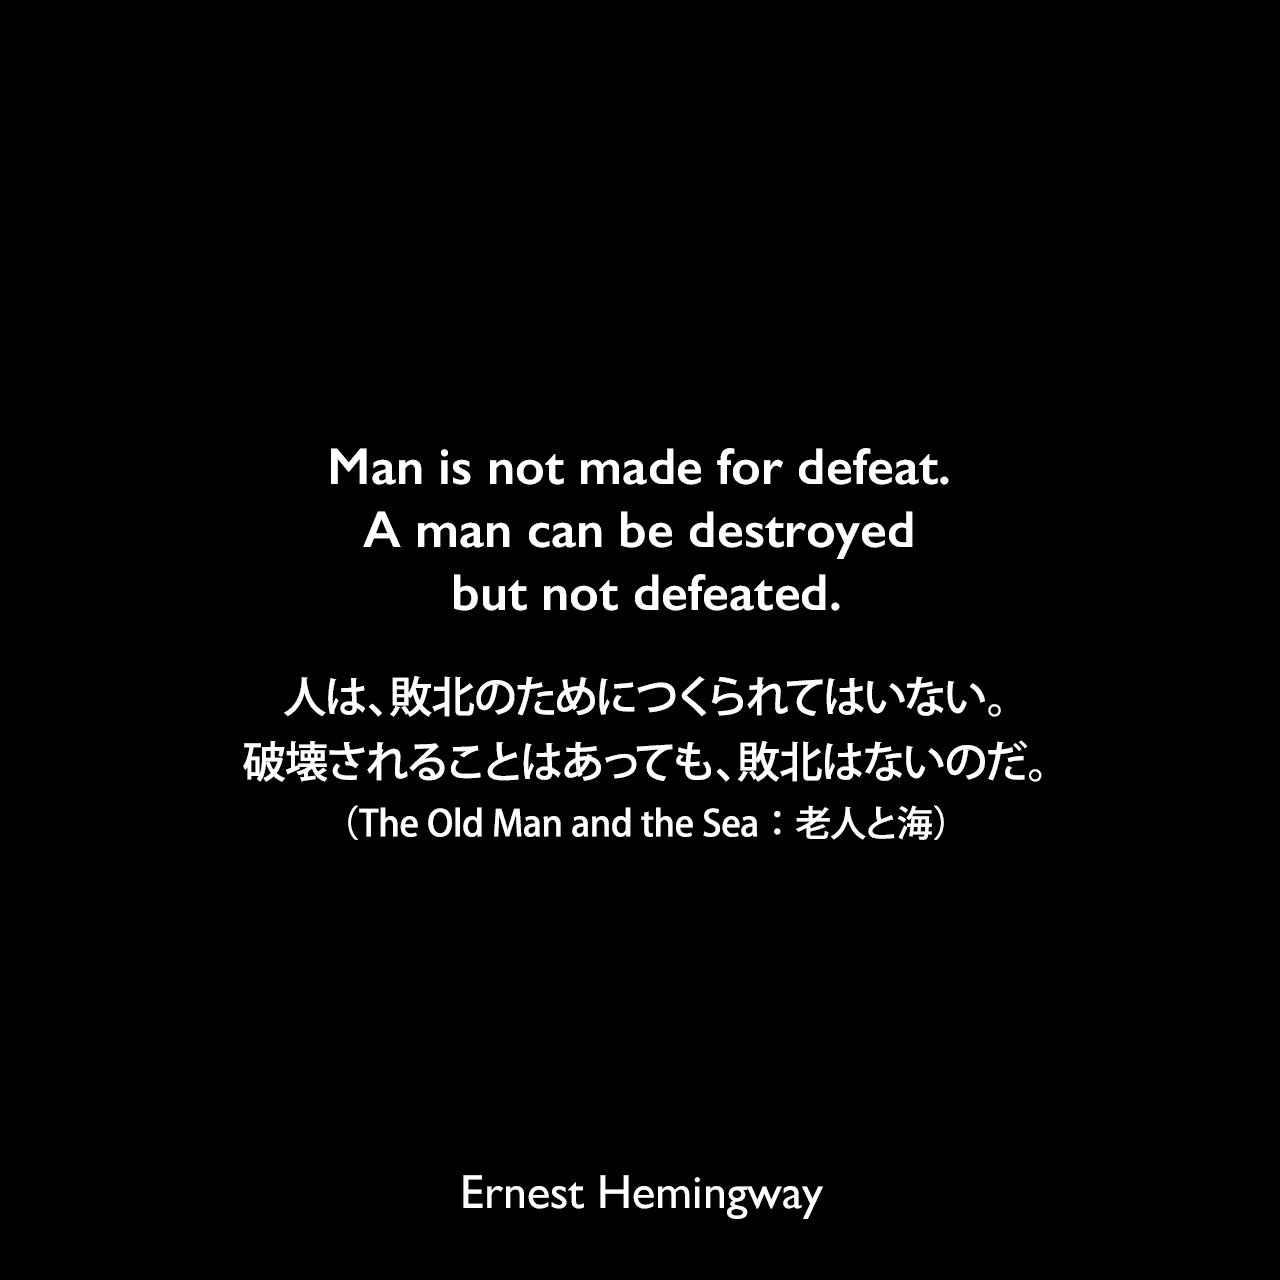 Man is not made for defeat. A man can be destroyed but not defeated.人は、敗北のためにつくられてはいない。破壊されることはあっても、敗北はないのだ。（The Old Man and the Sea：老人と海）Ernest Hemingway